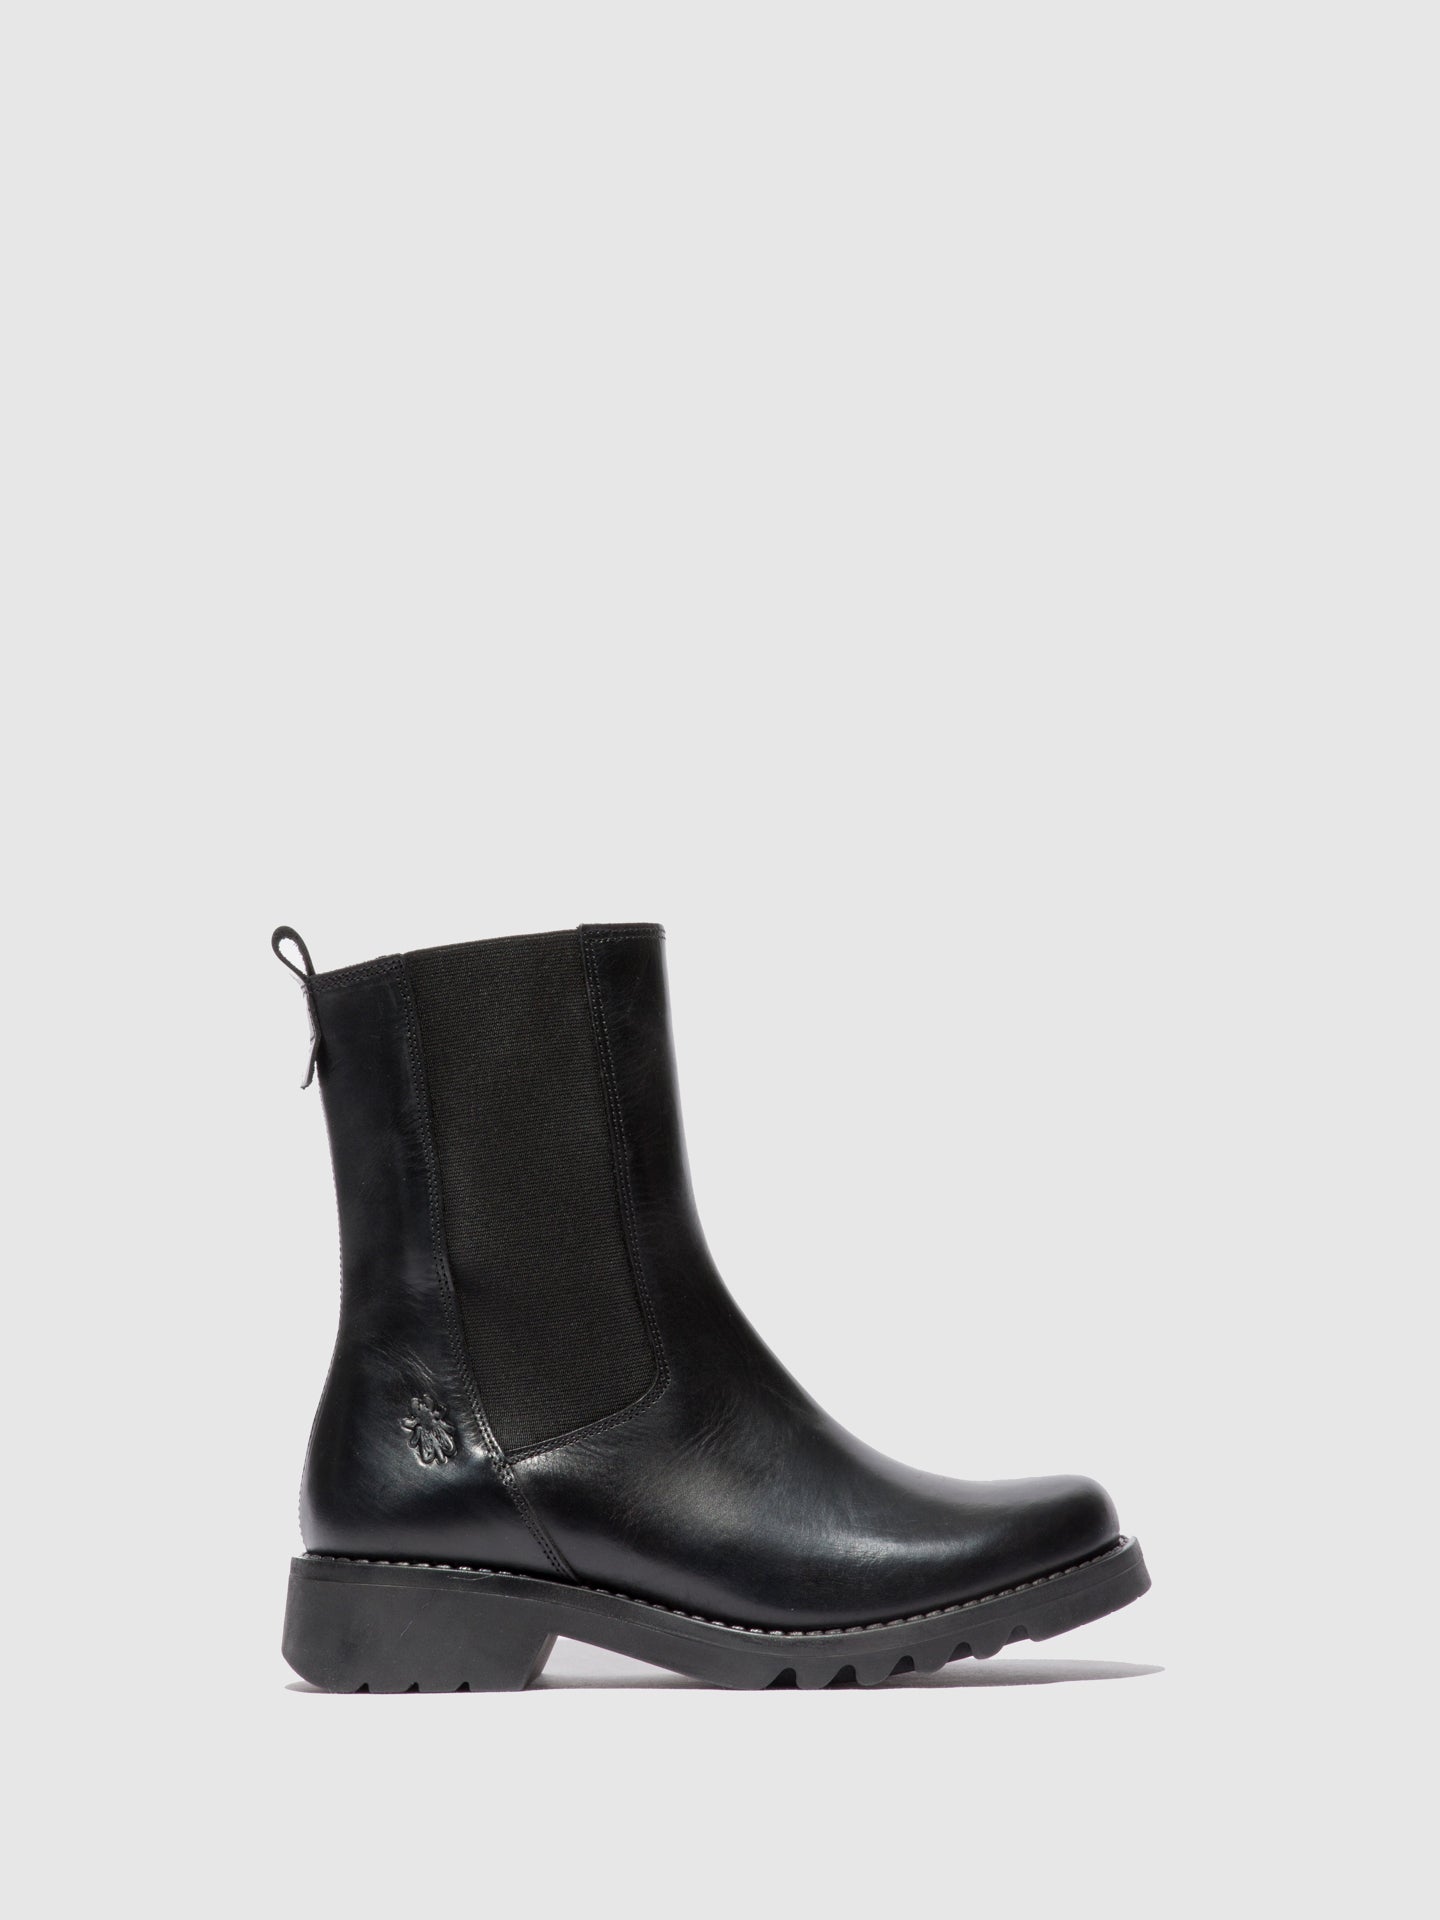 Fly London Chelsea Ankle Boots REIN795FLY RUG BLACK(ALL BLACK)